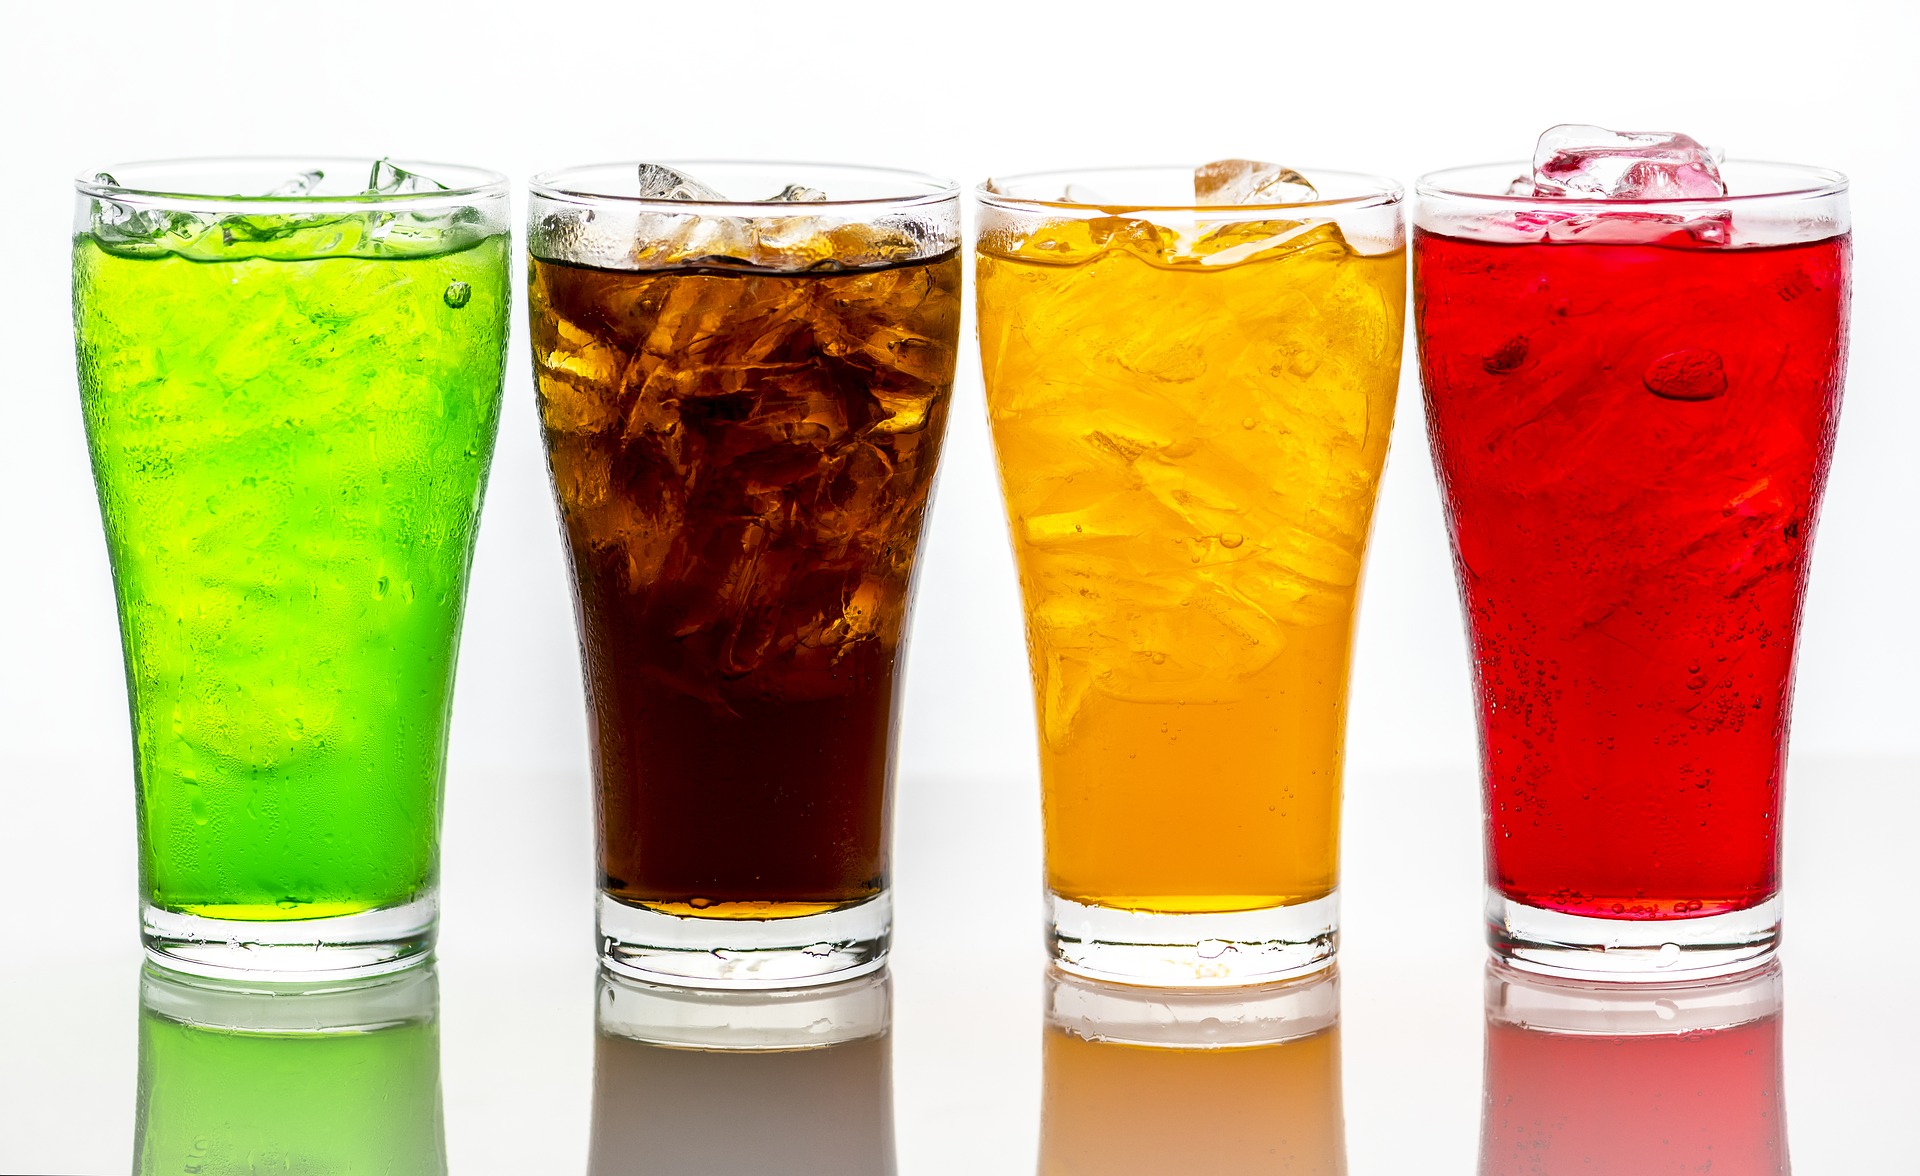 this is a picture of various fizzy drinks